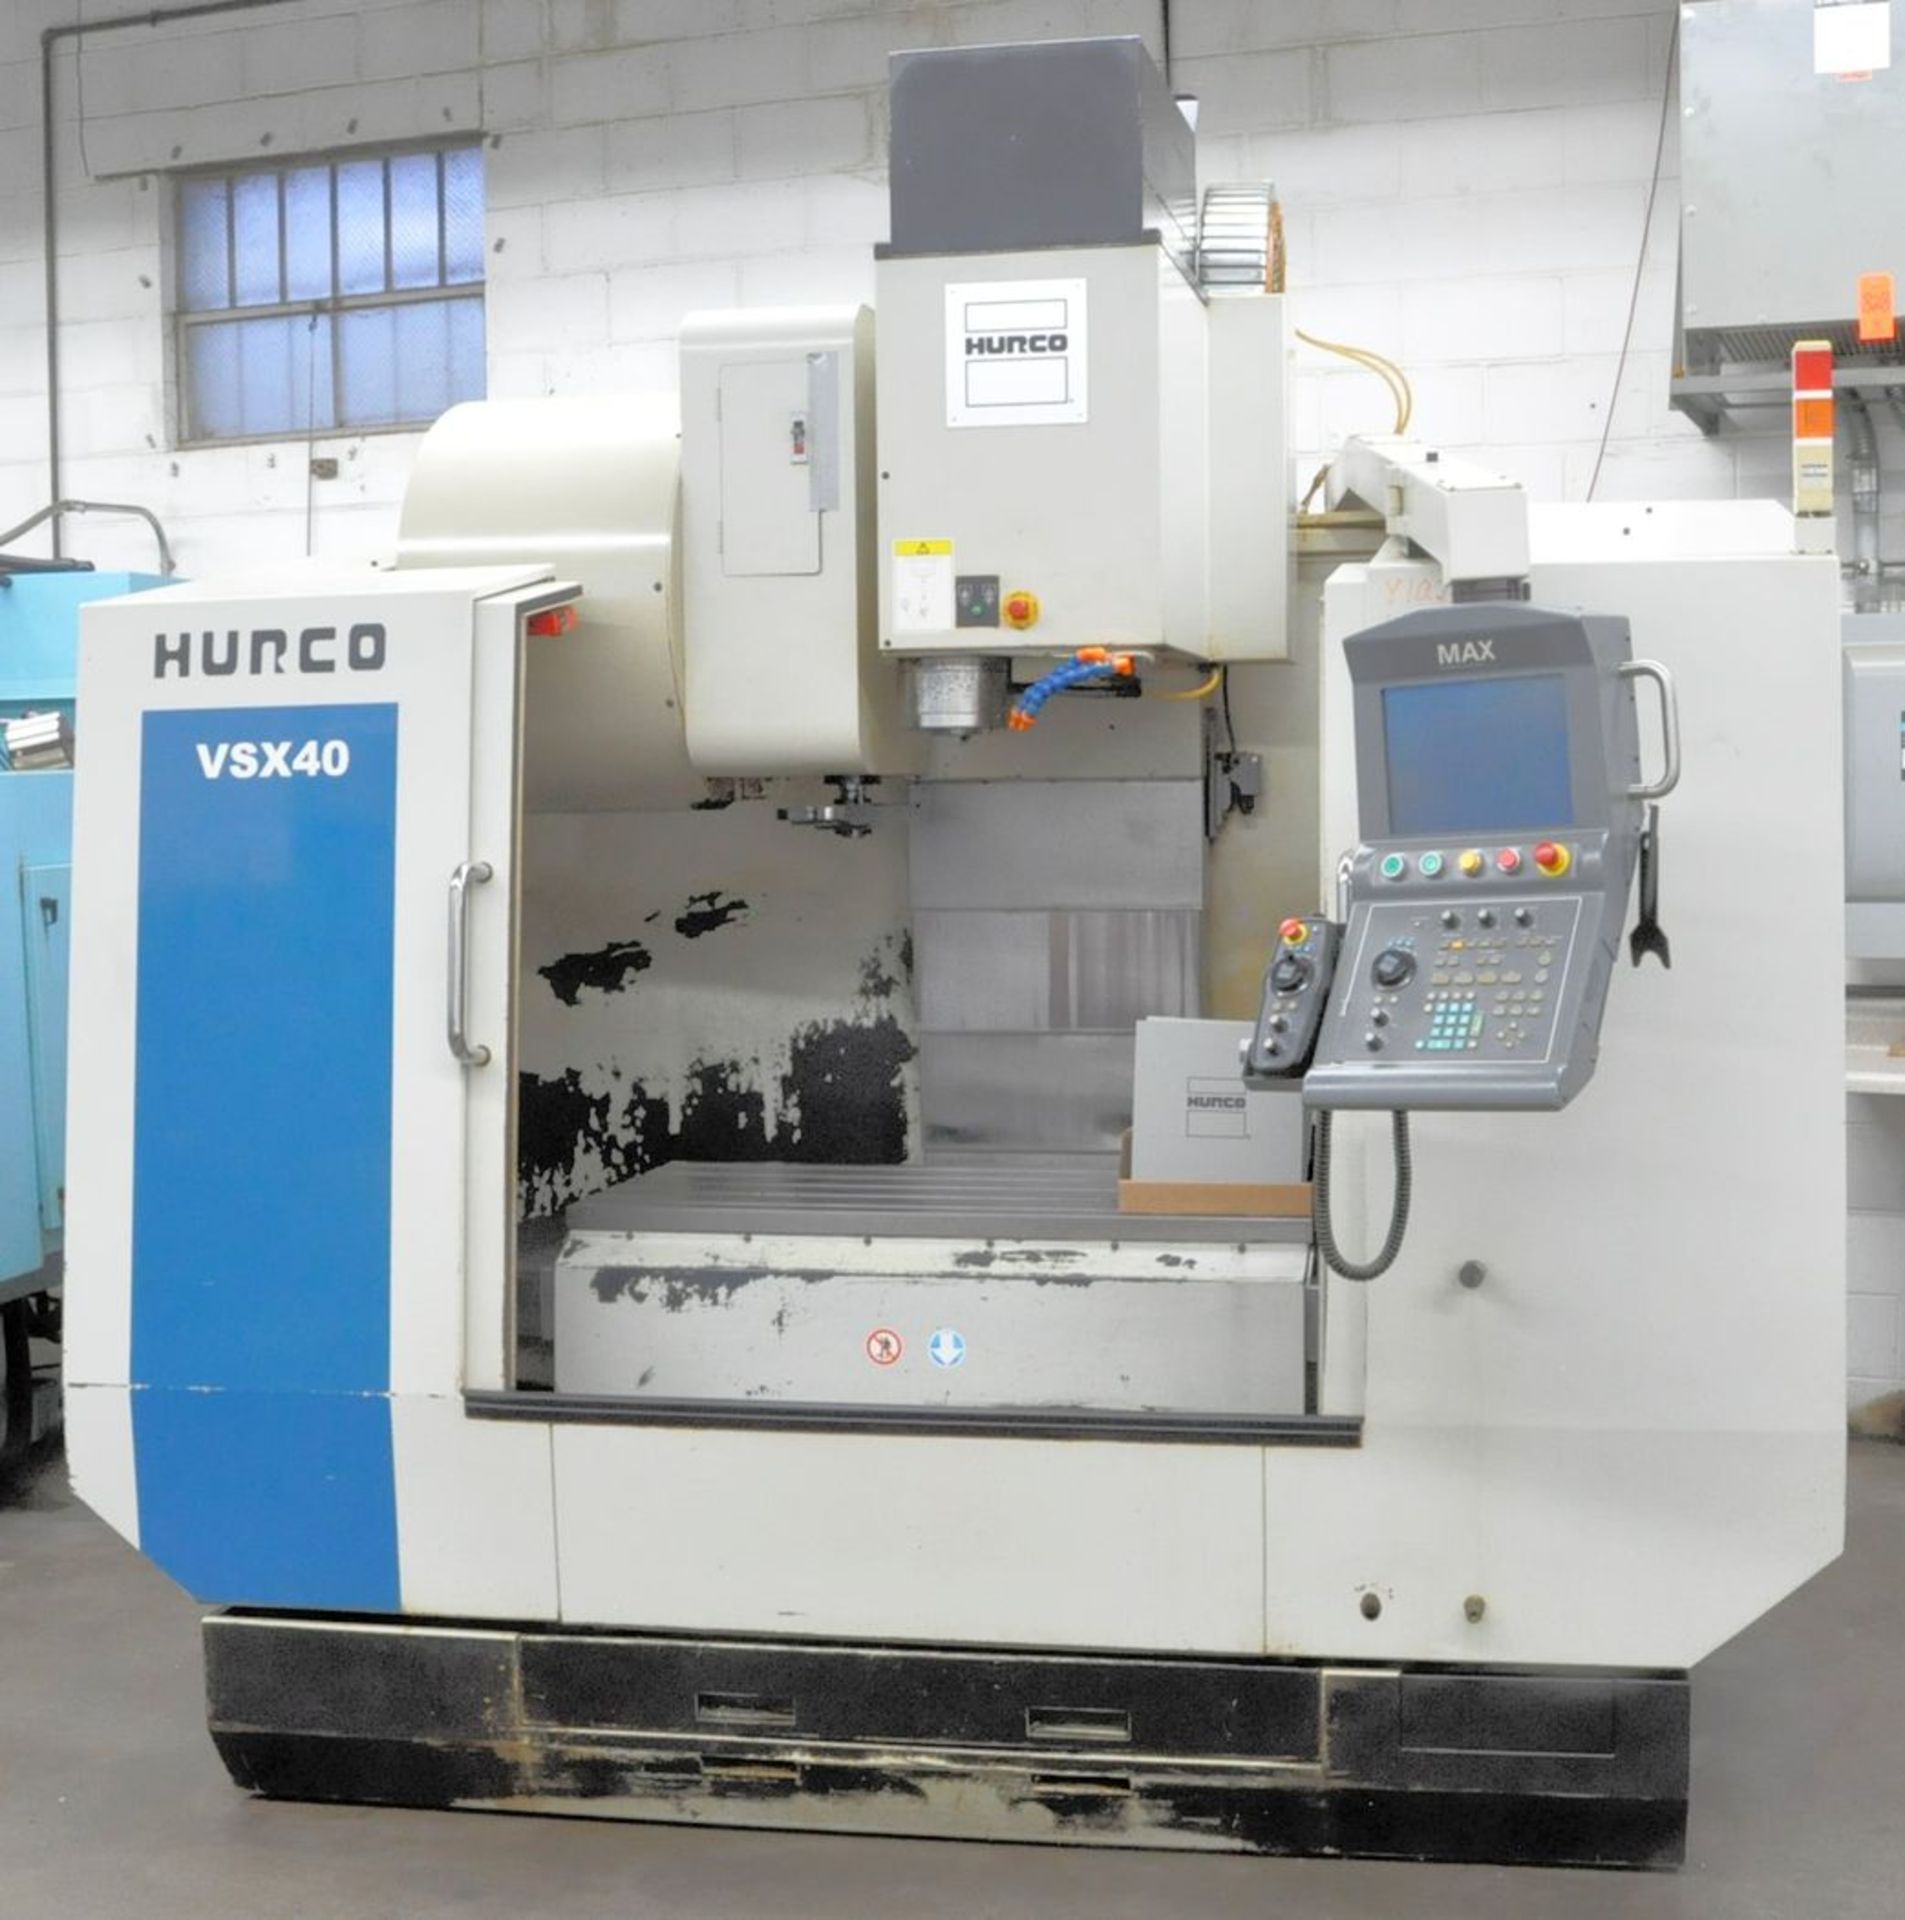 2001 Hurco 4-Axis Model VSX-40 CNC Vertical Machining Center, S/N: Q6783; 24-Position Automatic Tool